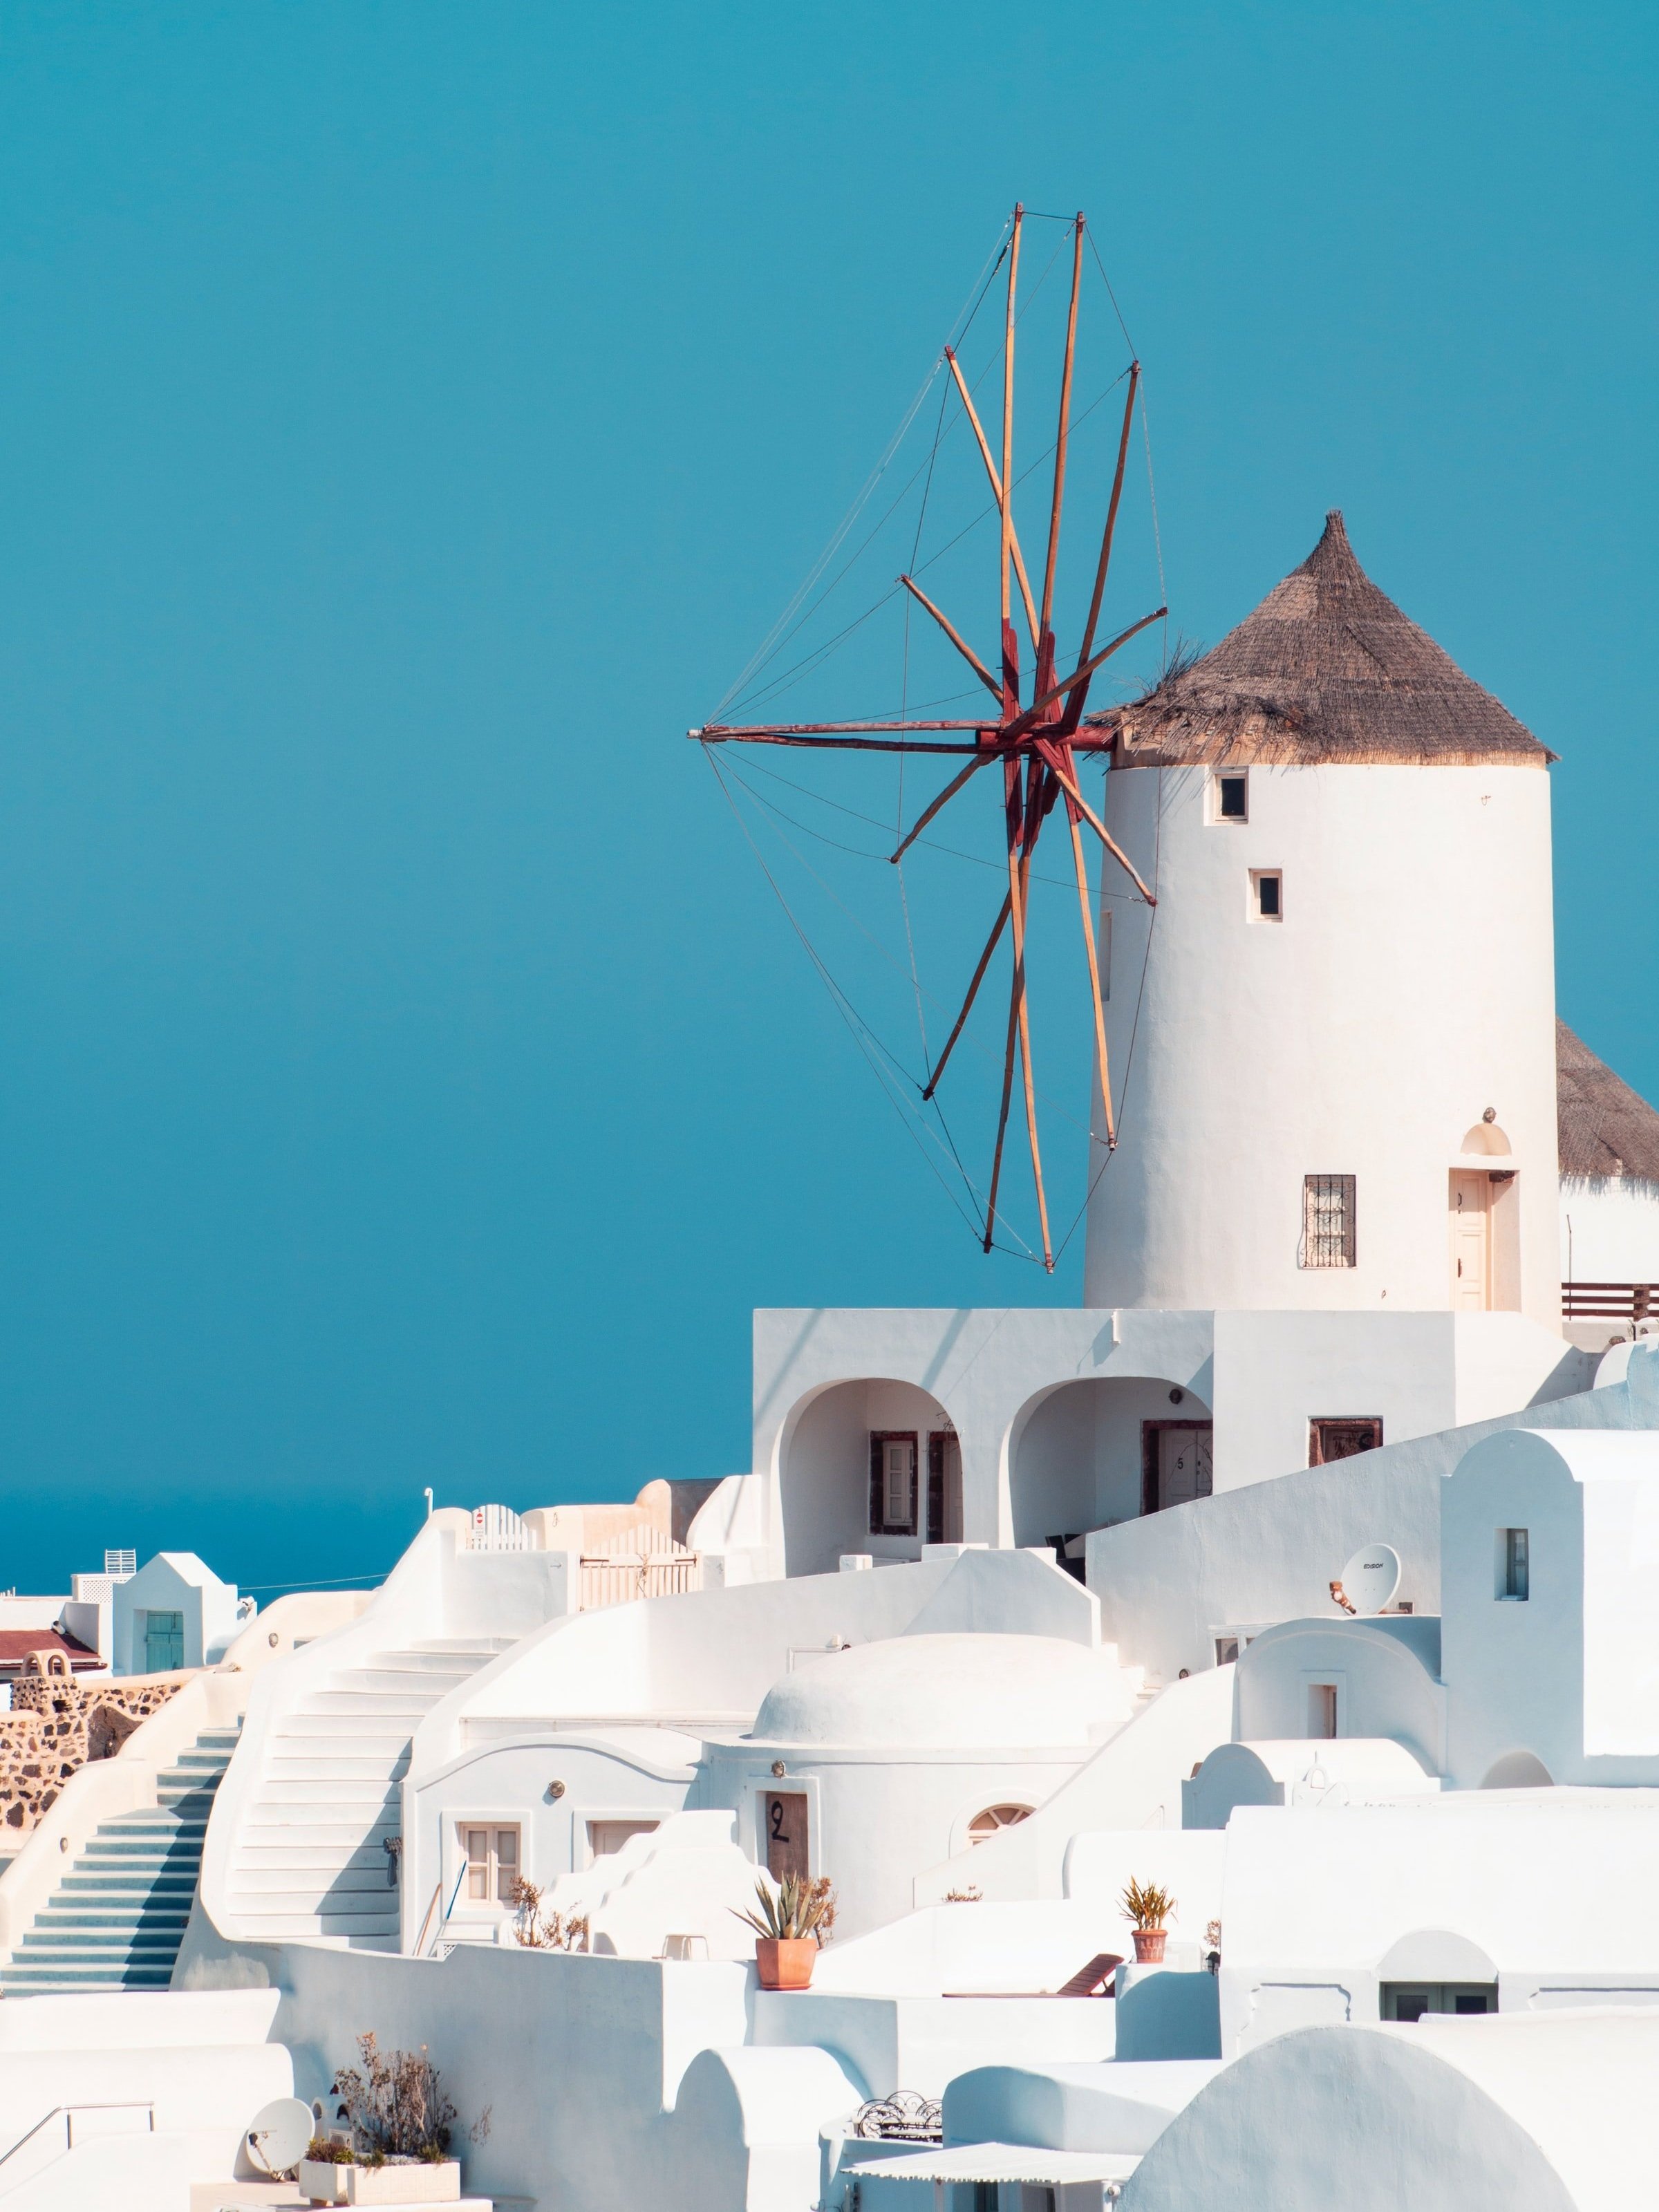 Oia, Santorini is a magical place with its windmills and whitewashed buildings